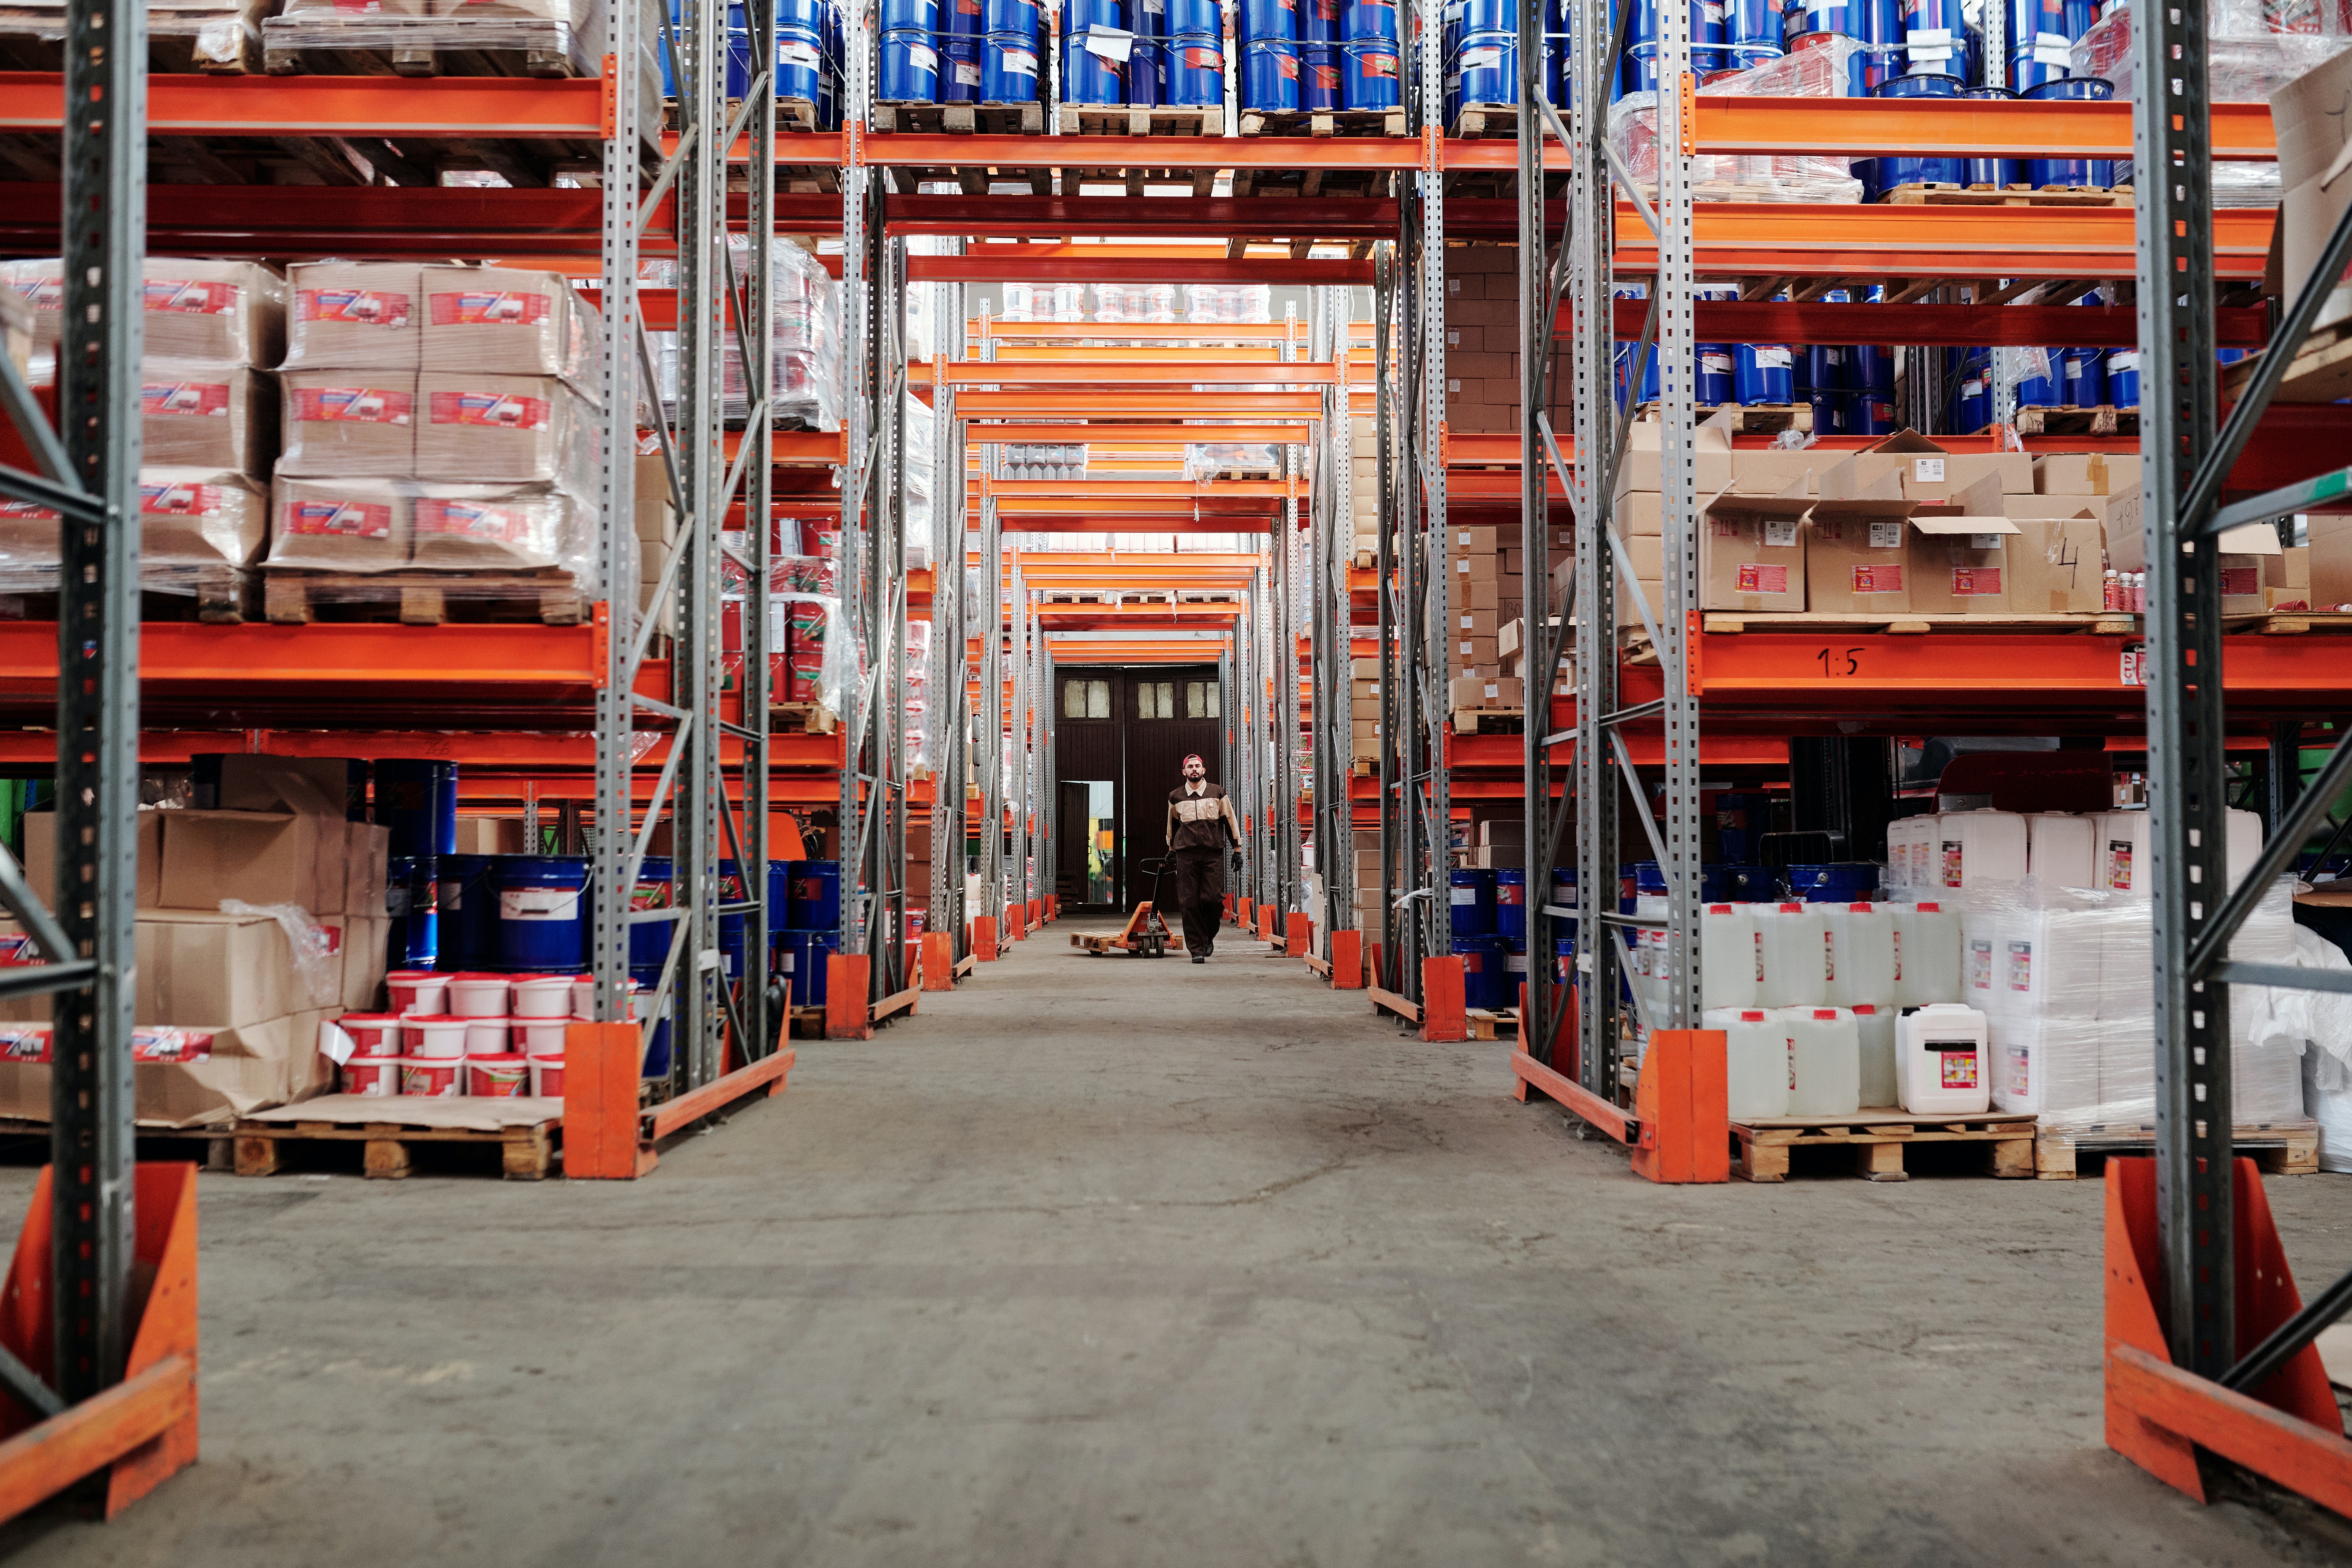 SkuNexus warehouse management systems (WMS)  provide order fulfillment solutions.